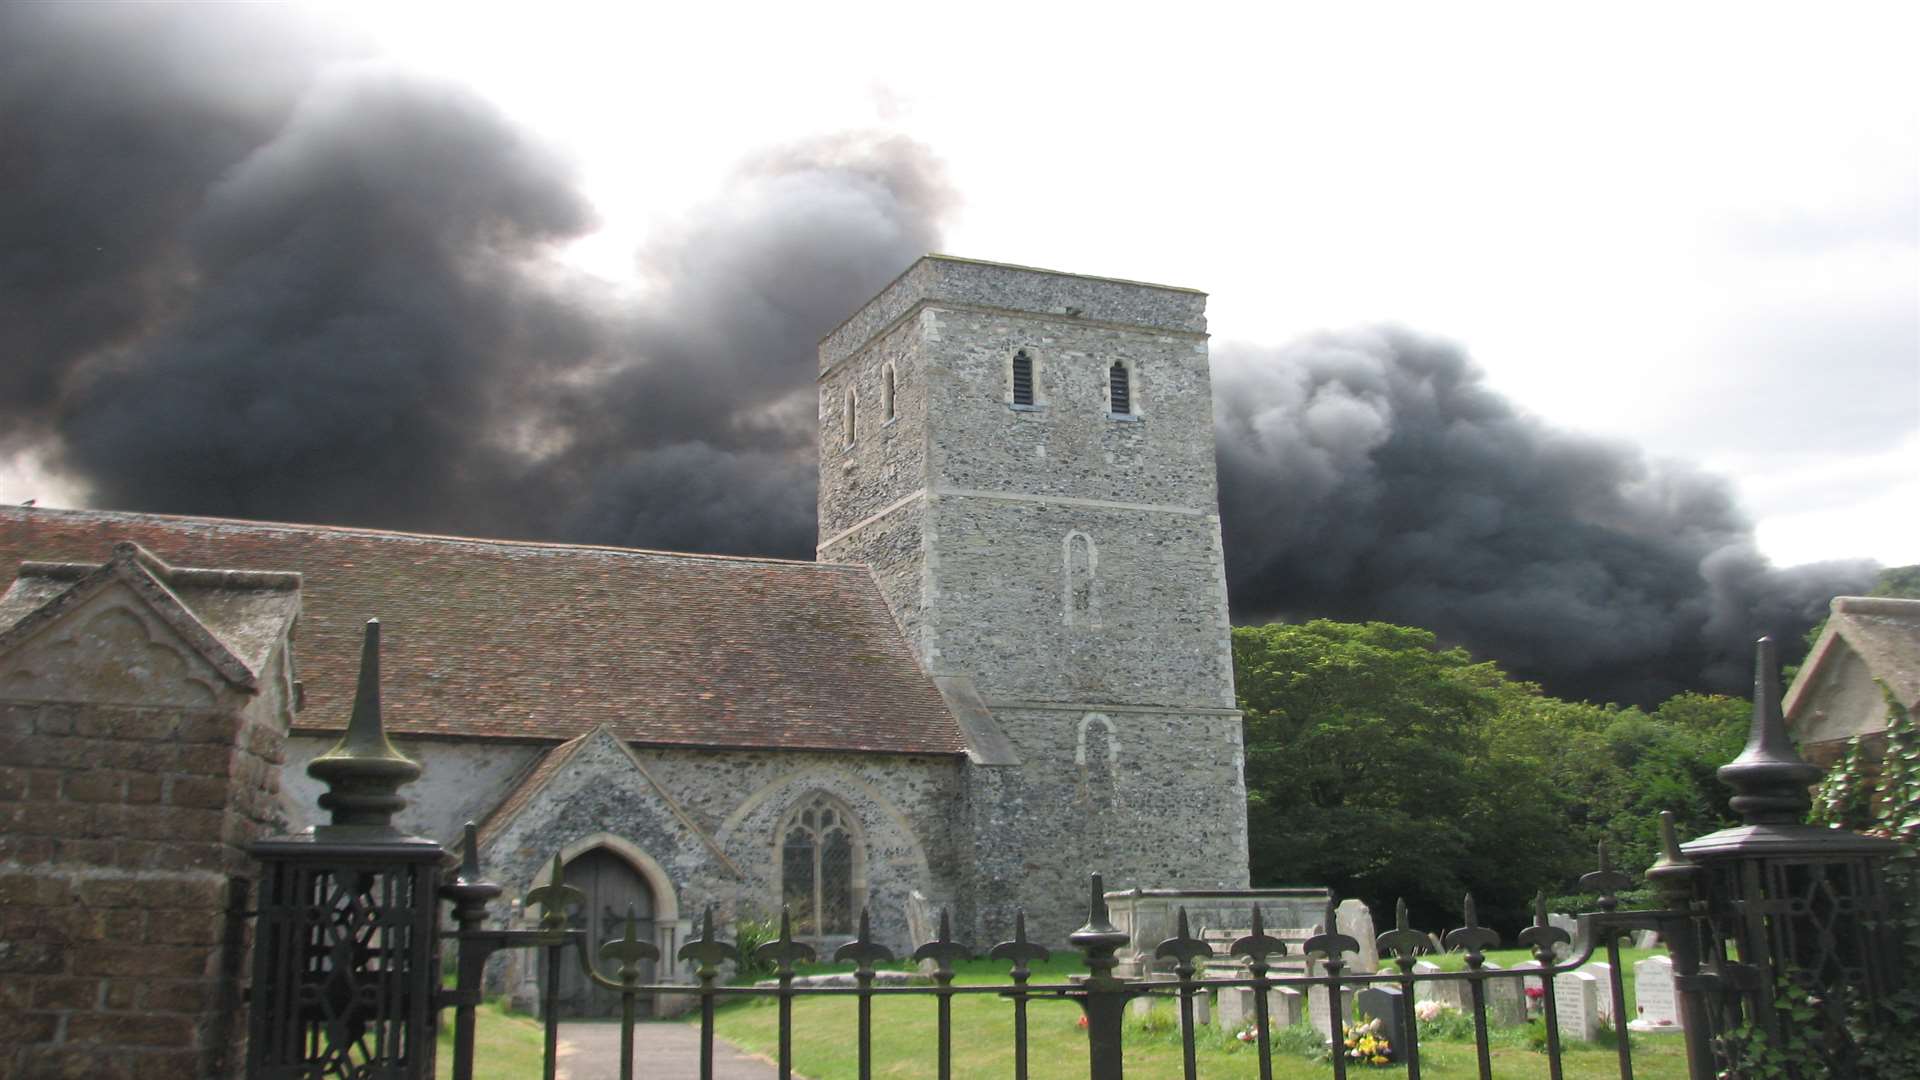 The smoke clouds can be seen over a nearby church. Picture: David Mairs